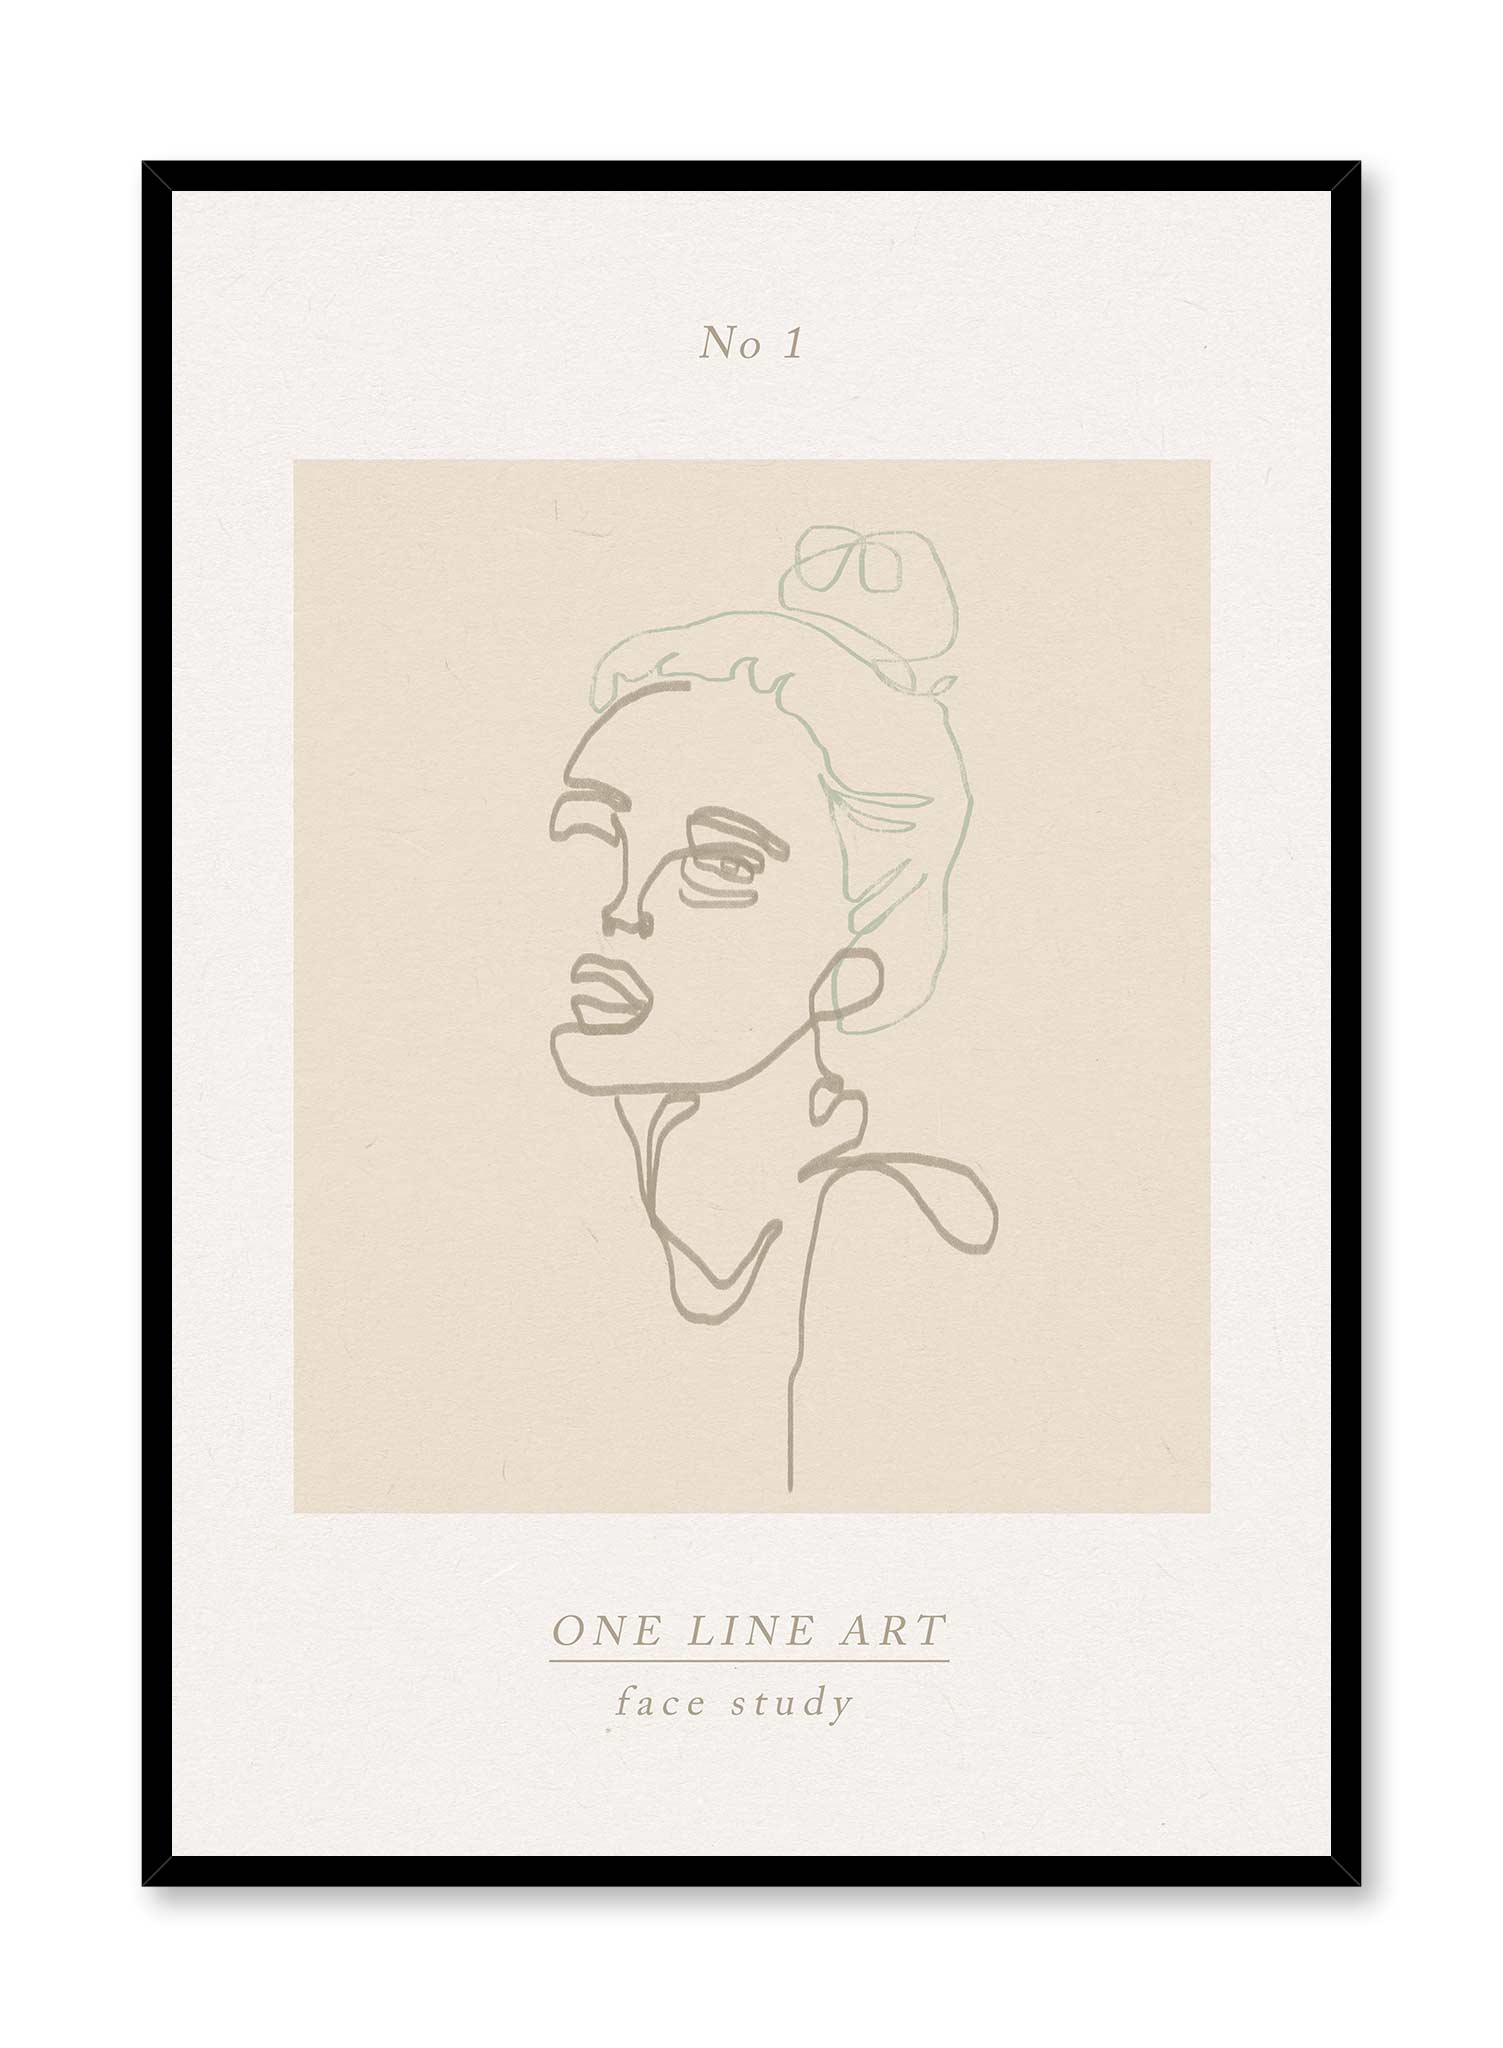 Wink is a line art illustration of a woman in a bun winking at the observer by Opposite Wall.